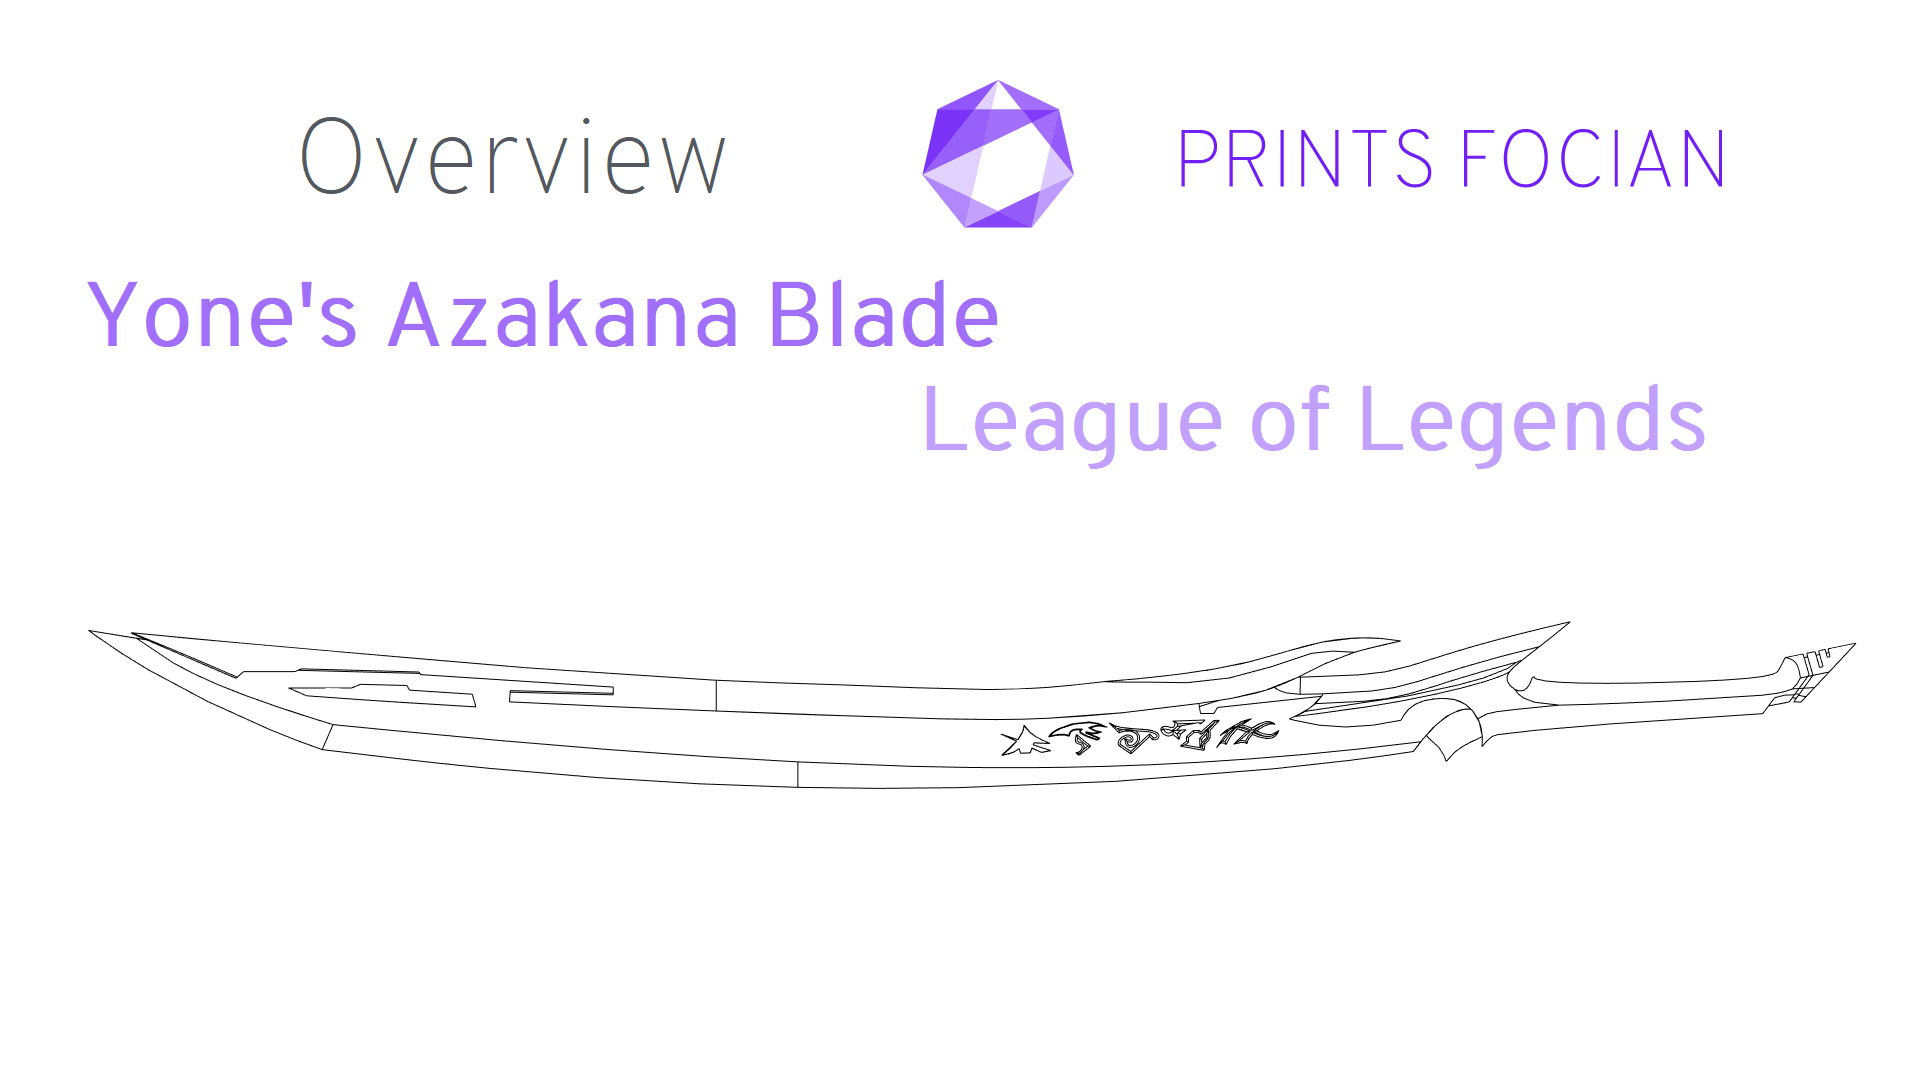 Wireframe image of Yones Azakana Sword on a white background. Prints Focian Icon top and central. Text: Purple Prints Focian, Yones Azakana Blade and League of Legends. Dark grey text Overview